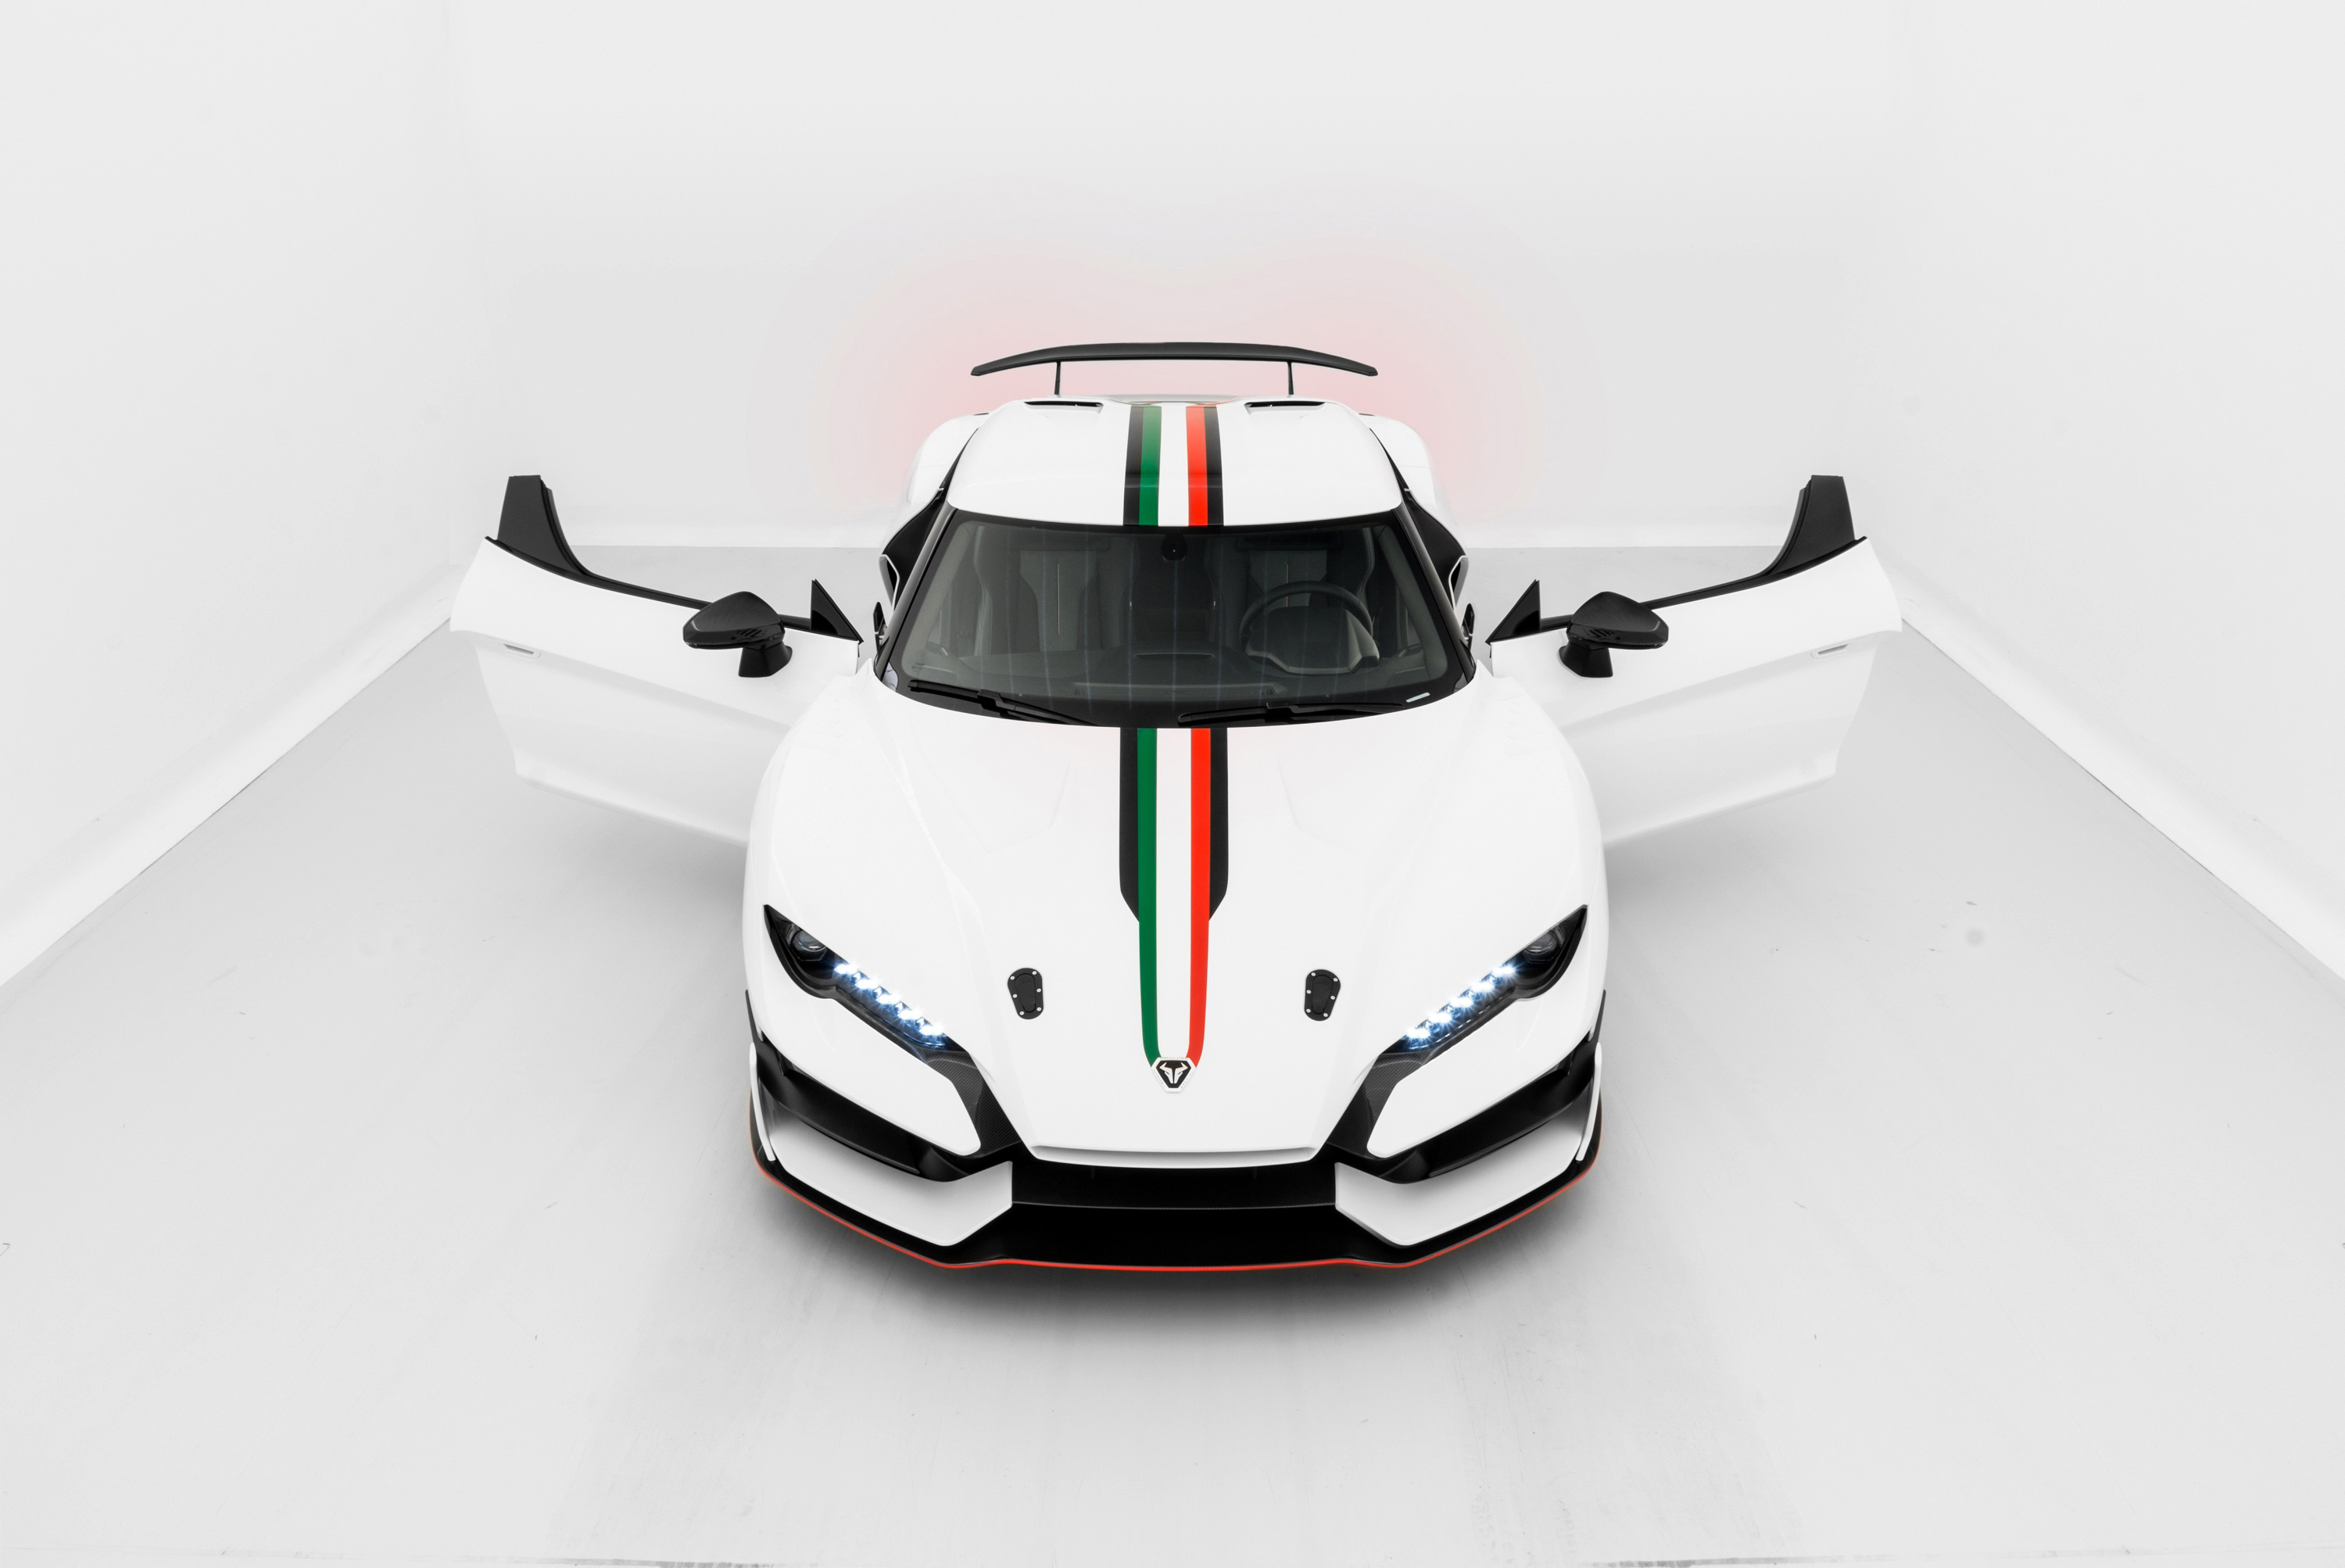 Italdesign Zerouno car in white with stripes on the hood with open doors